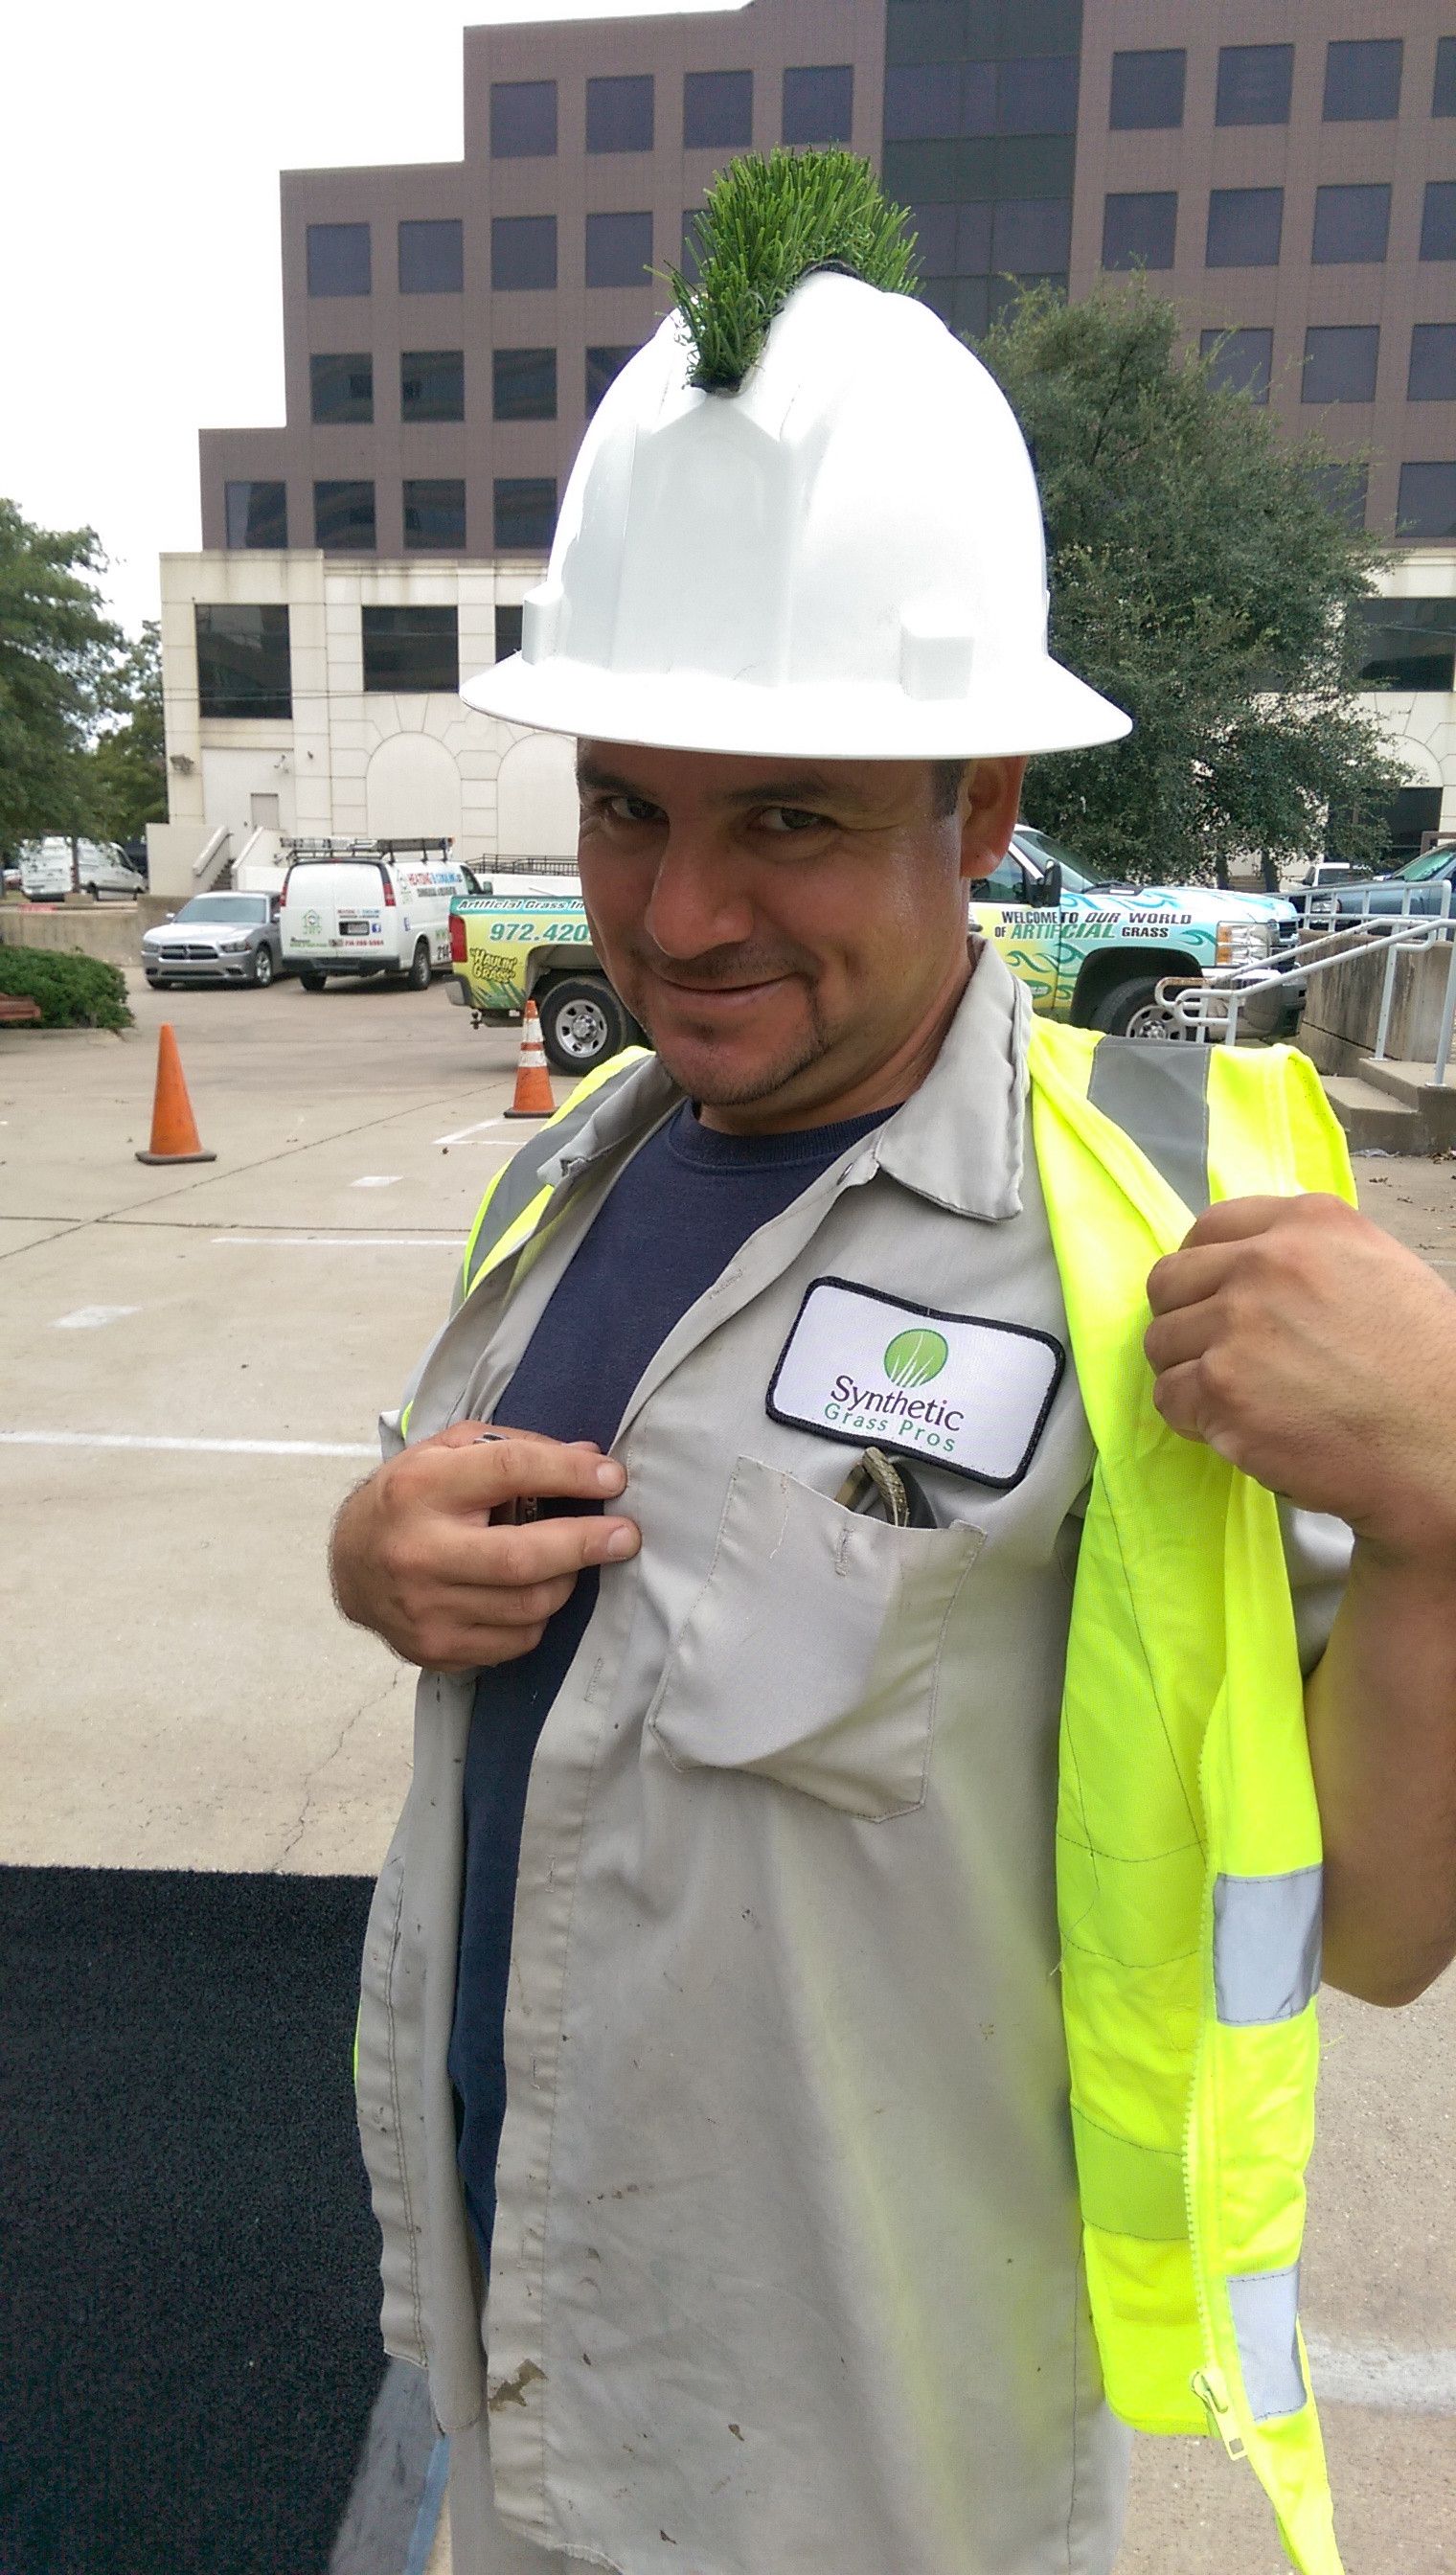 Worker who installs astroturf gave himself a fake grass mohawk on his hardhat.